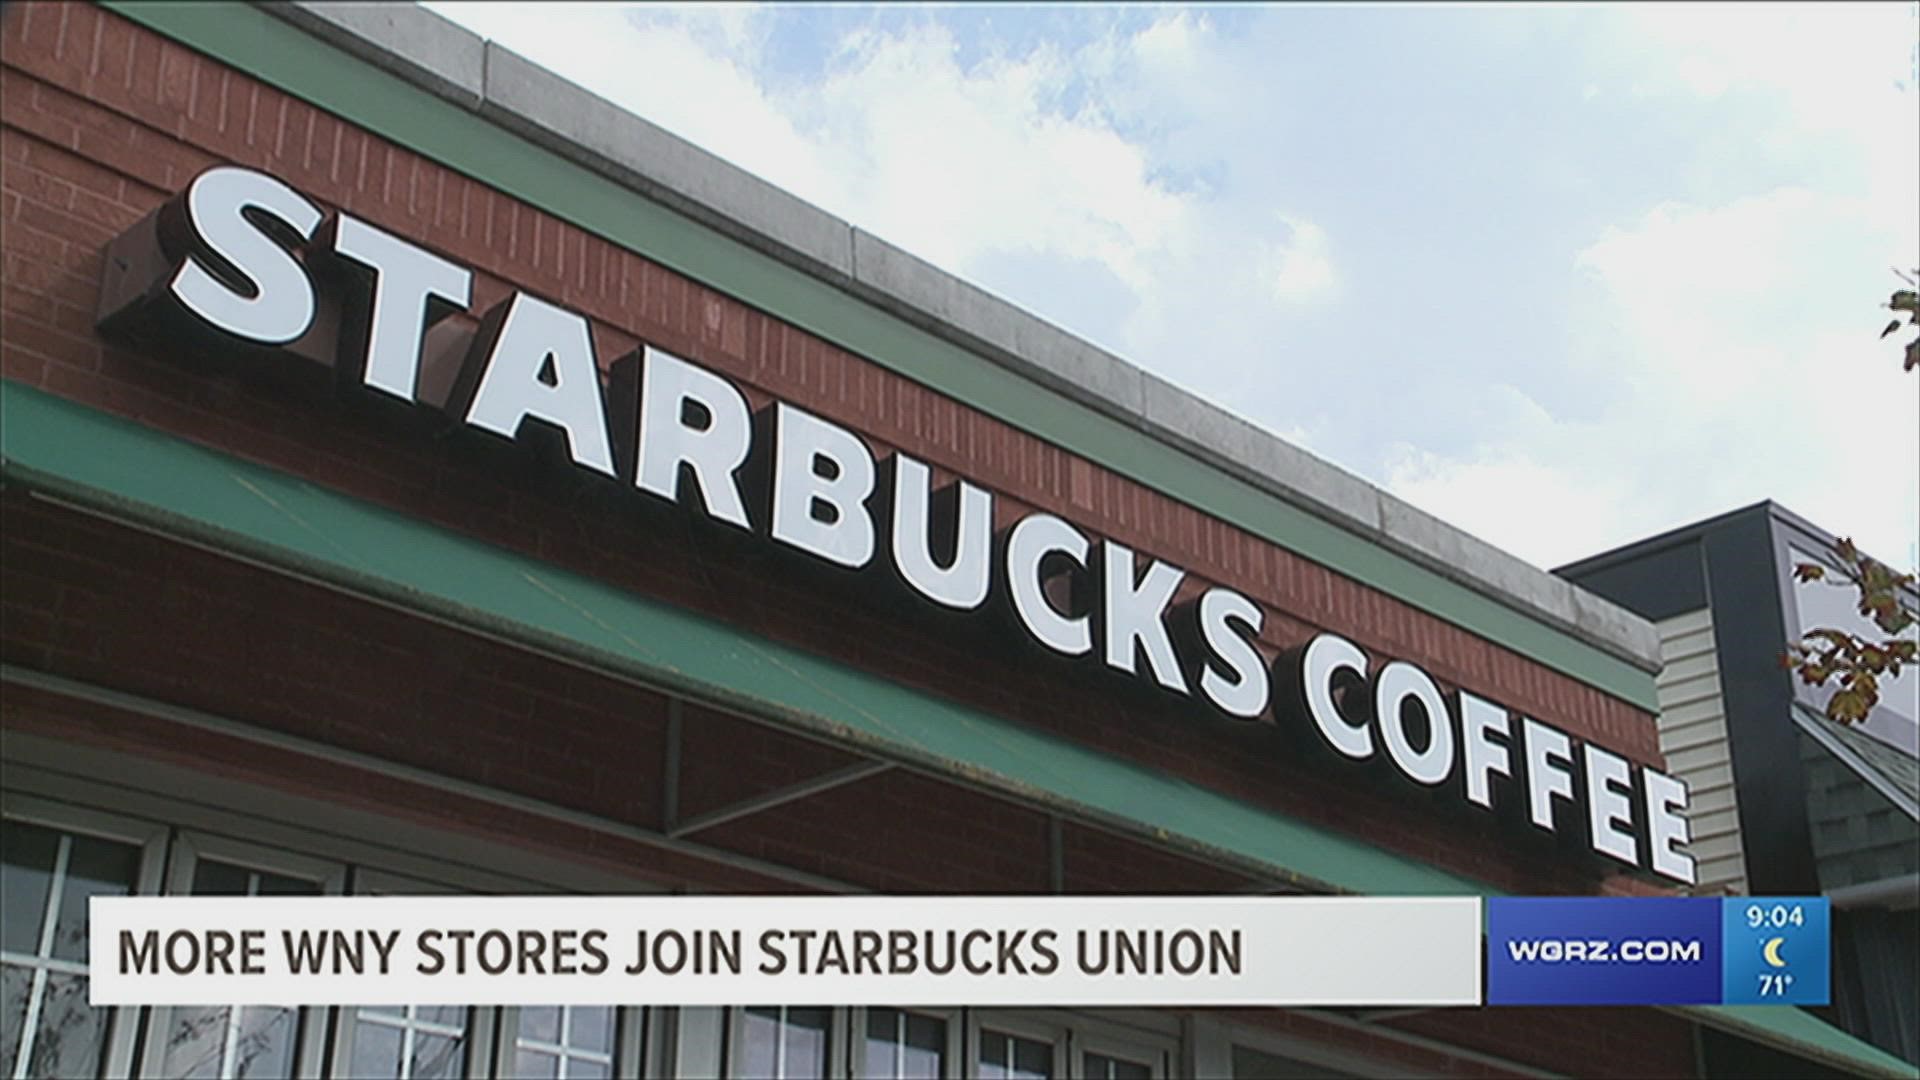 Starbucks Workers United said the workers at Walden and Anderson in Cheektowaga and at Transit Commons will file petitions to hold union elections.